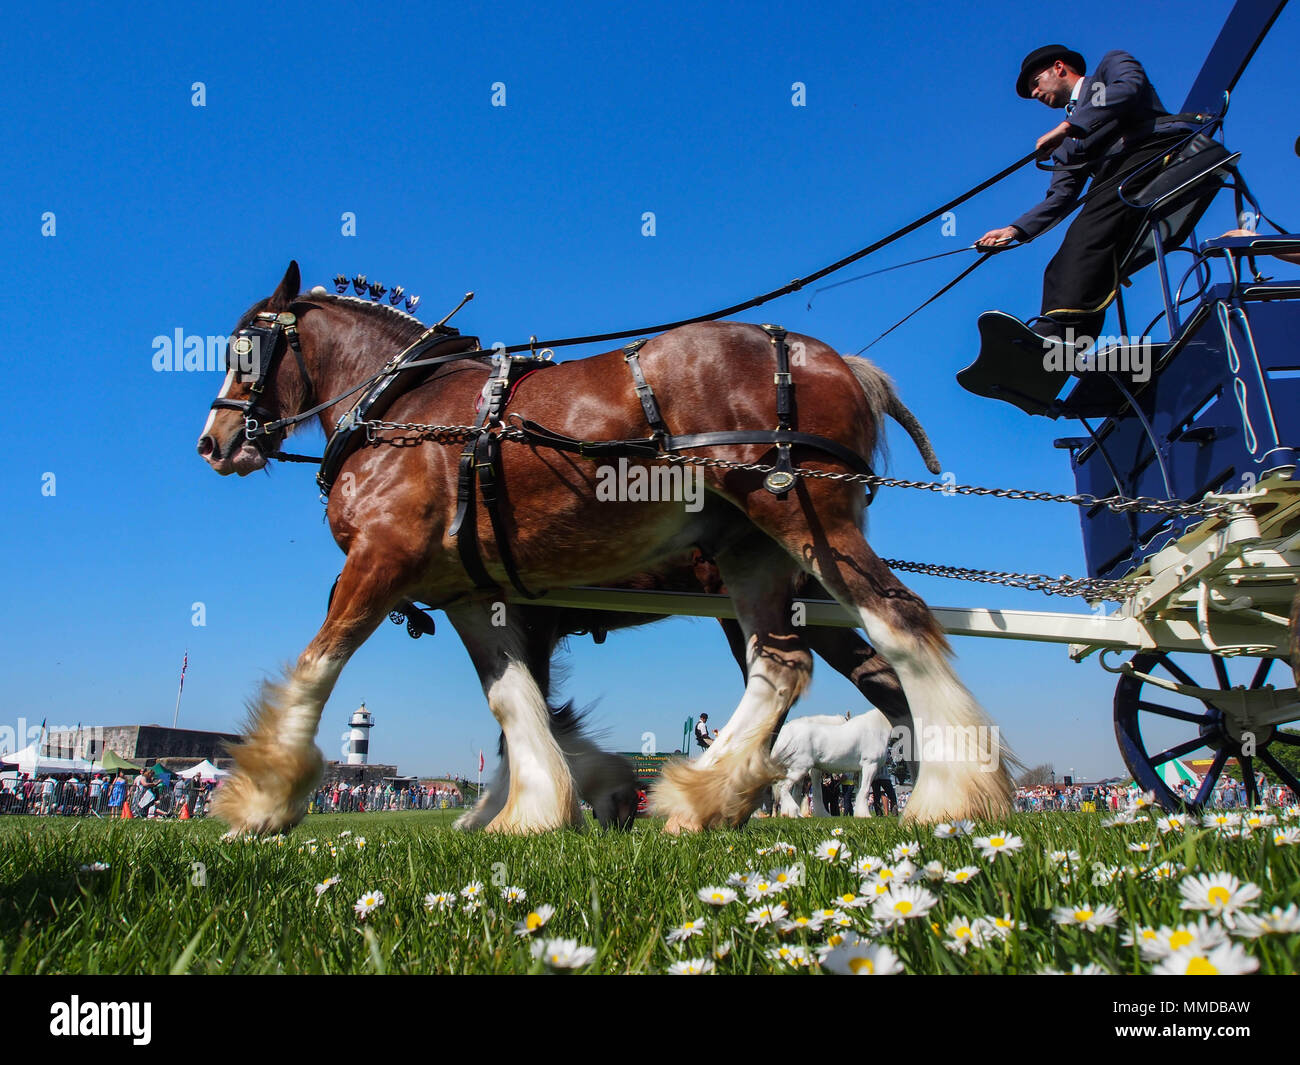 A horse drawn crriage displays at the Rural and Seaside show in Southsea, Portsmouth, England. Stock Photo